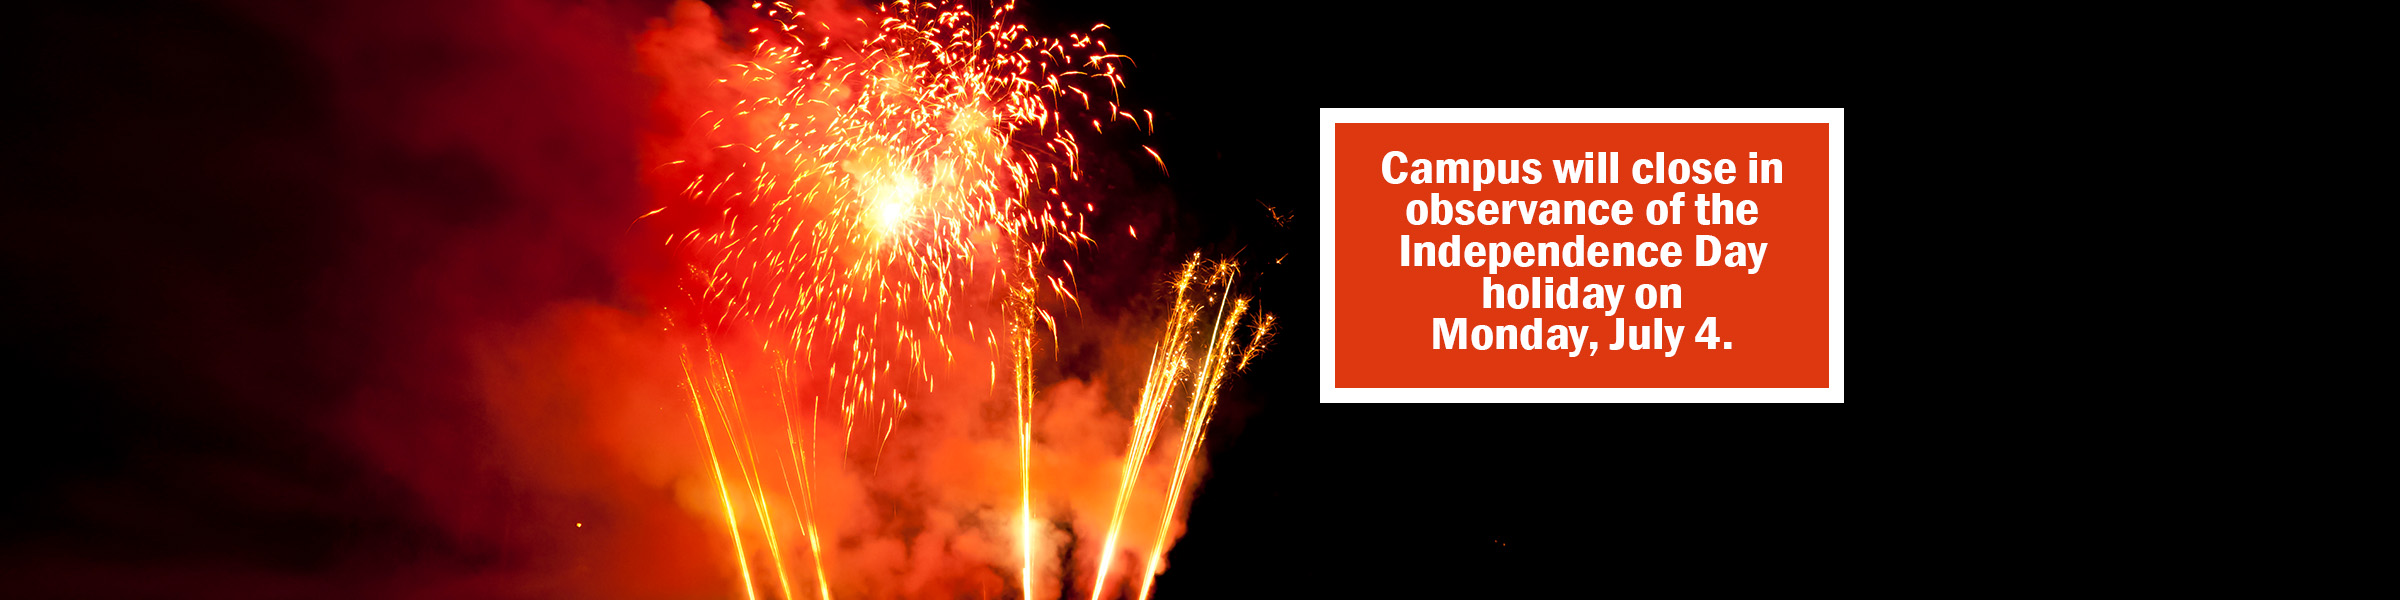 East Central University will close in observance of Independence Day on Monday, July 4. 